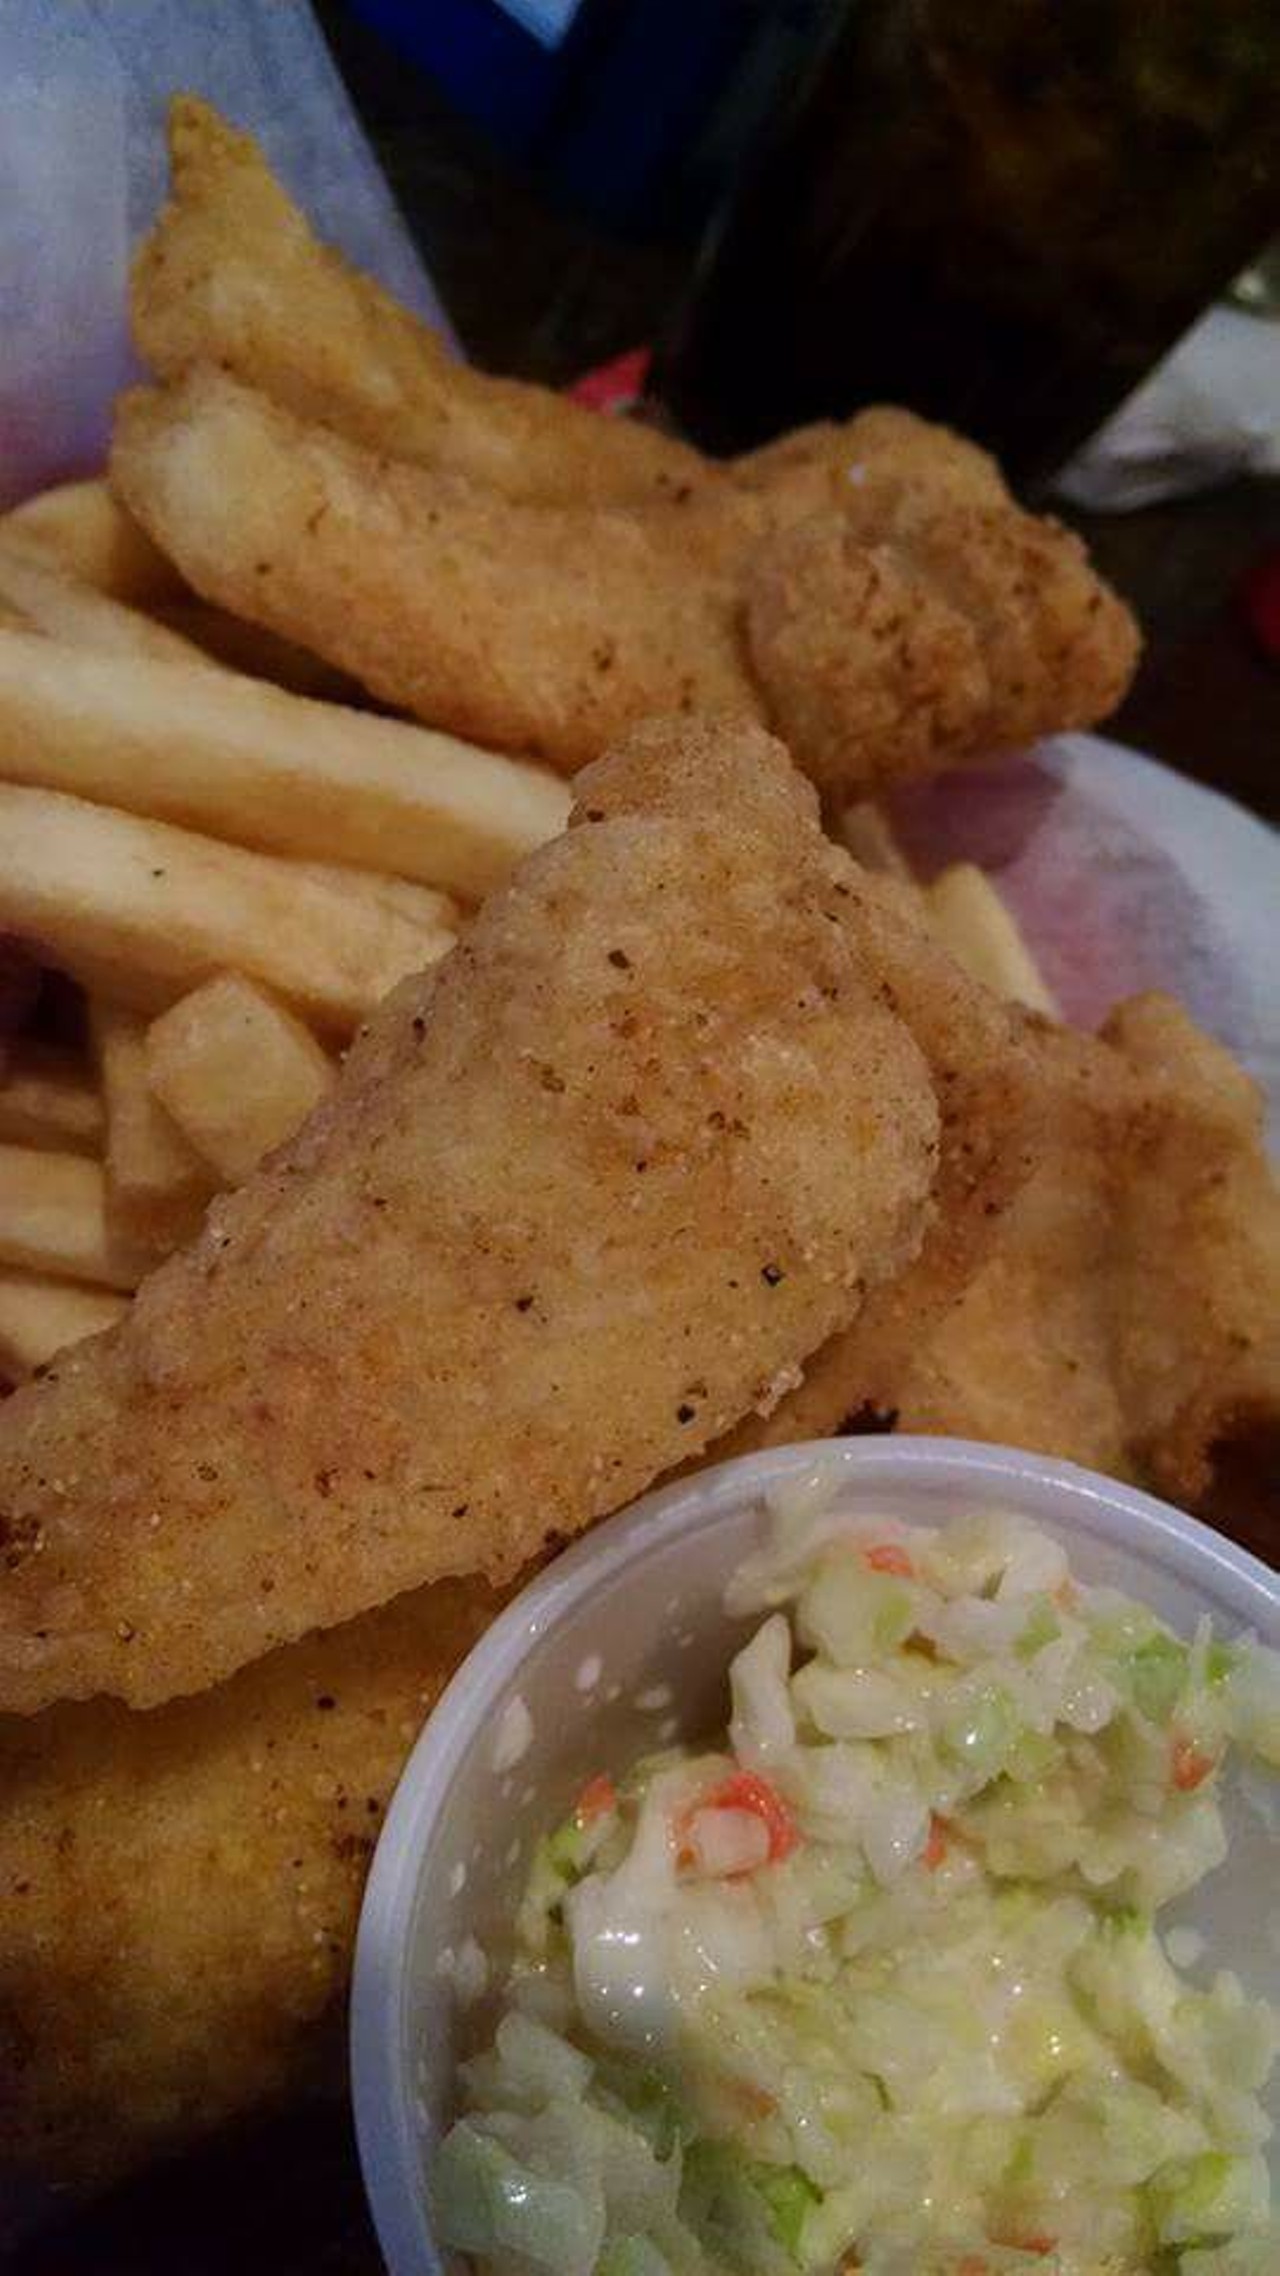 American Legion Post #484
1837 Sutton Ave., Mt. Washington
Fish frys held every Friday from Feb. 16 to March 29 from 4:30-8 p.m. Takeout is available by calling 513-231-7351.